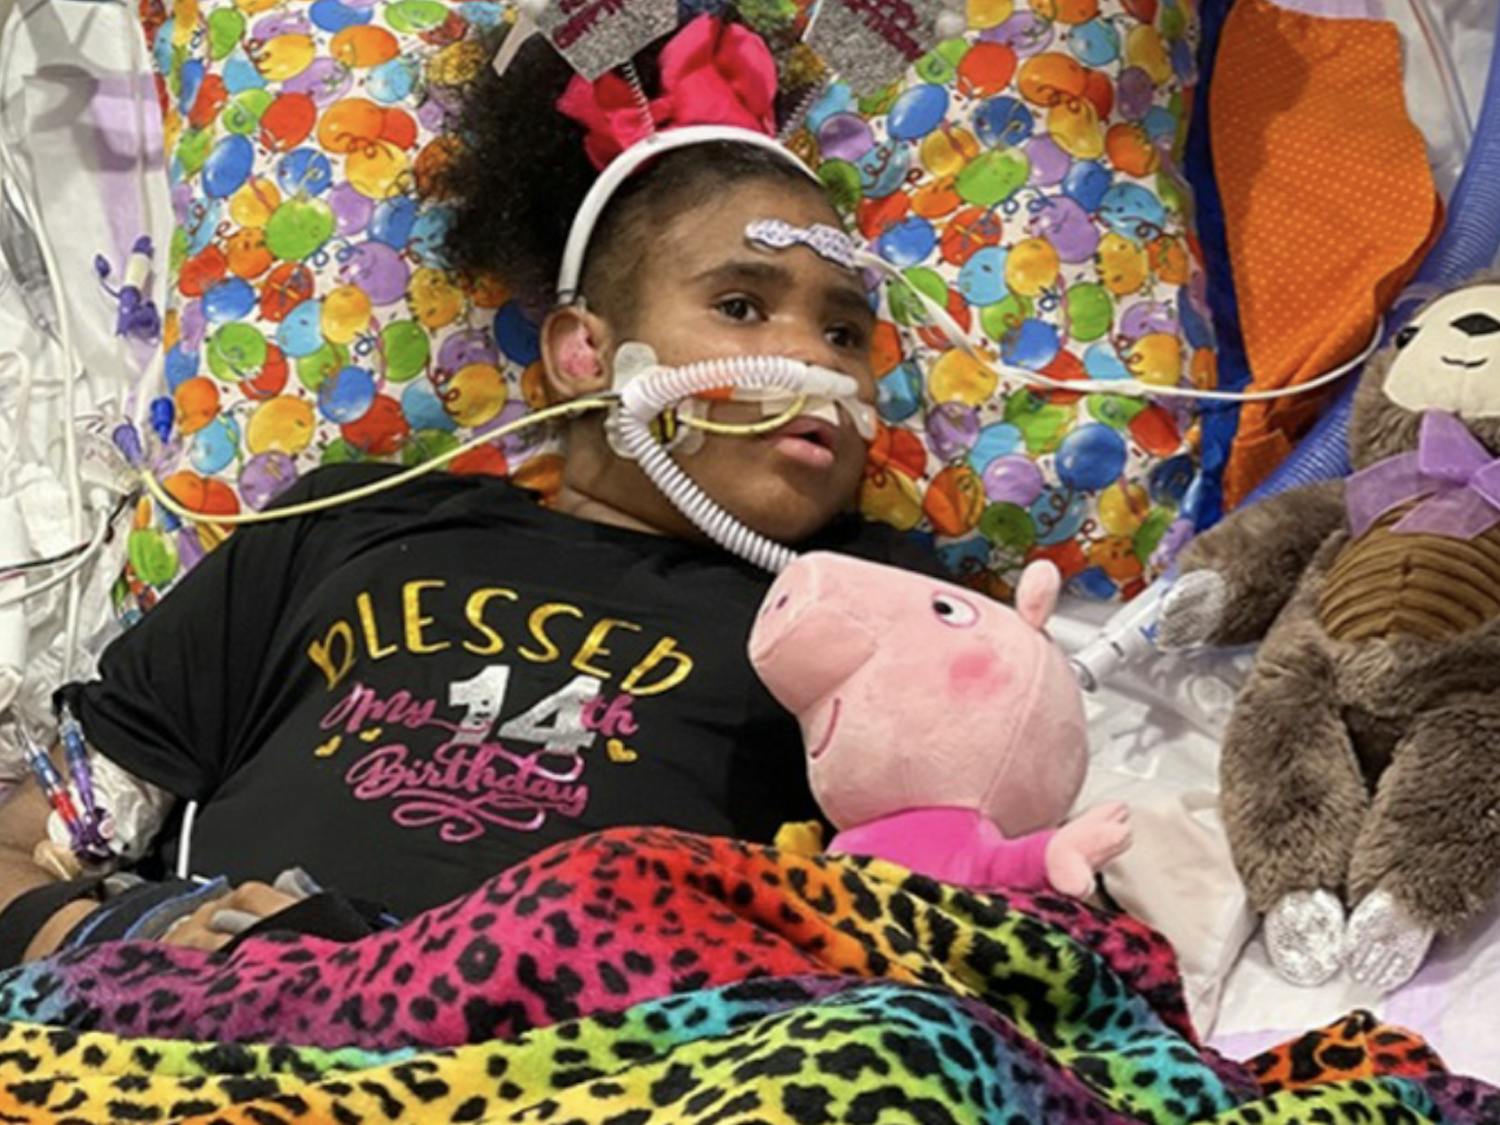 Jaynzra “Nae” Rice was hospitalized at Duke earlier this year with breathing difficulties and received a left ventricle assist device that helps the heart pump.